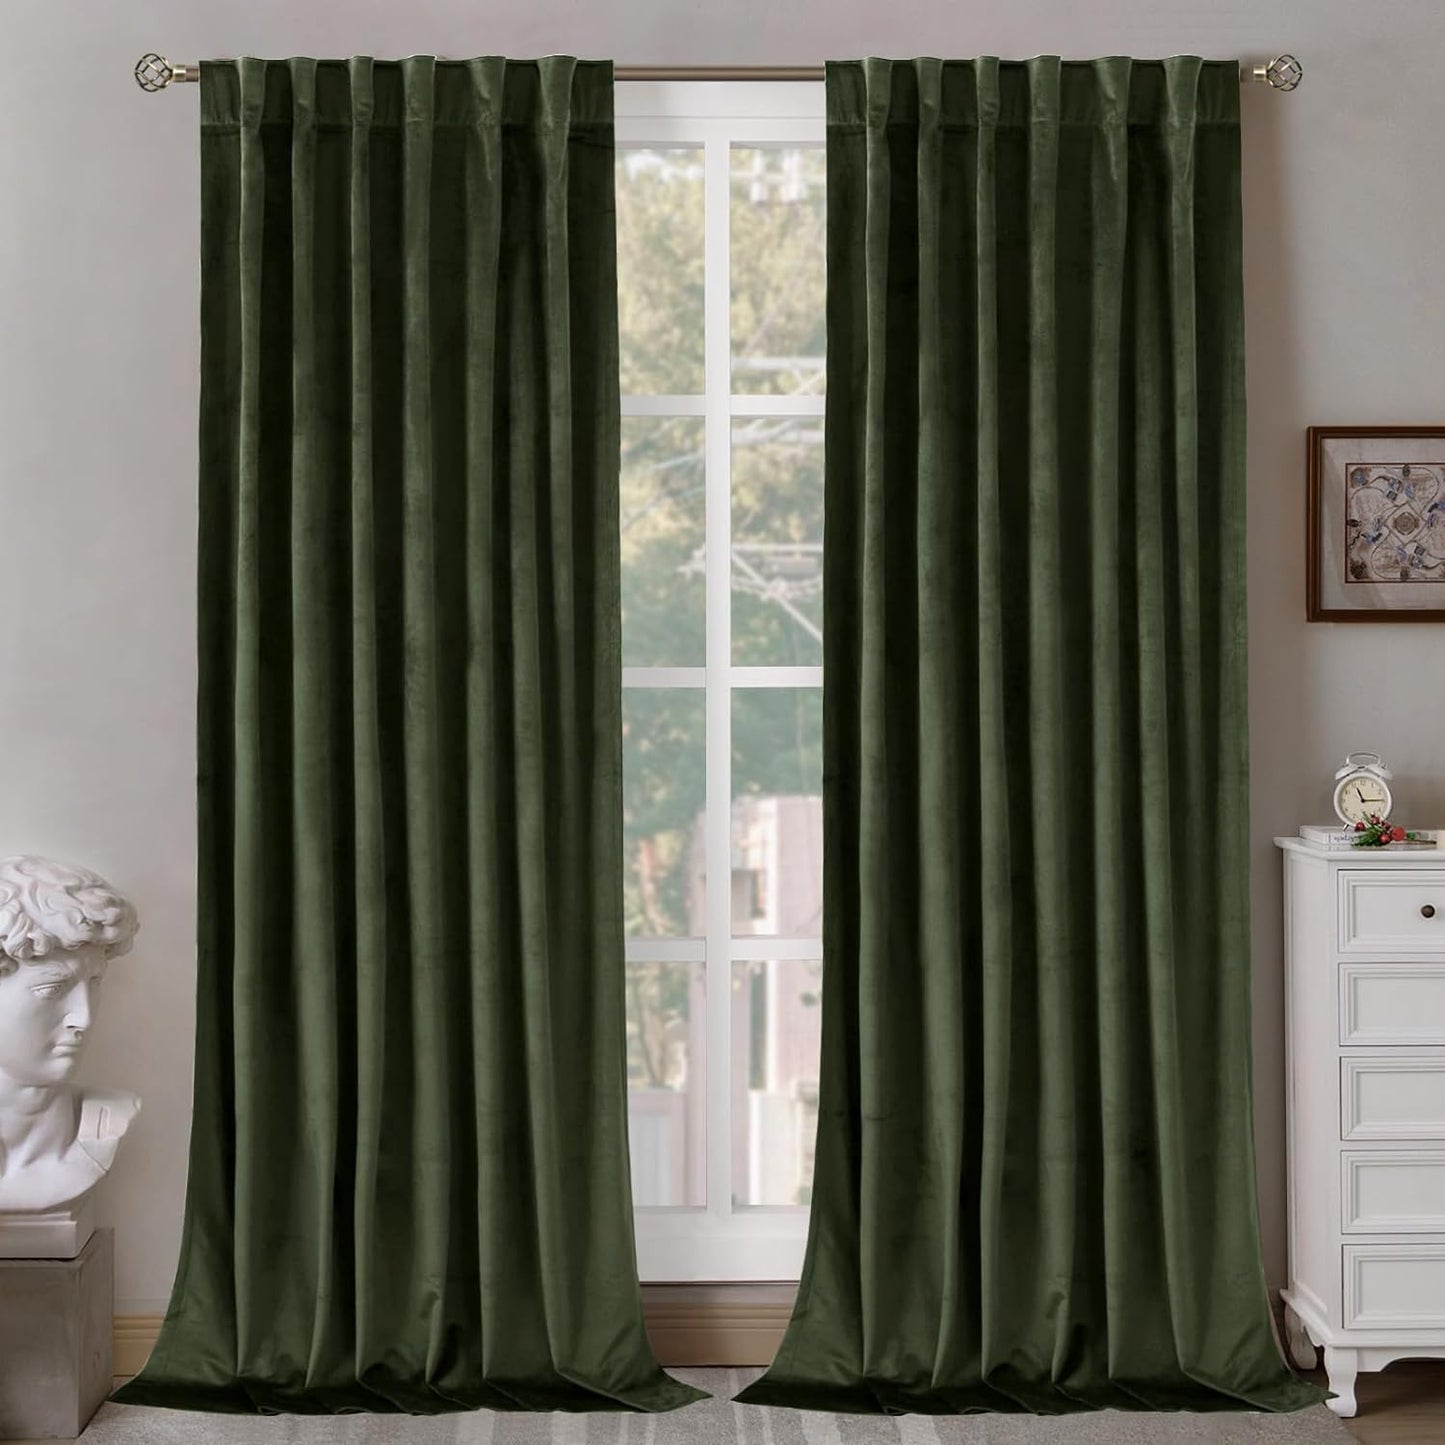 Bgment Grey Velvet Curtains 108 Inches Long for Living Room, Thermal Insulated Room Darkening Curtains Drapes Window Treatment with Back Tab and Rod Pocket, Set of 2 Panels, 52 X 108 Inch  BGment Olive Green 52W X 120L 